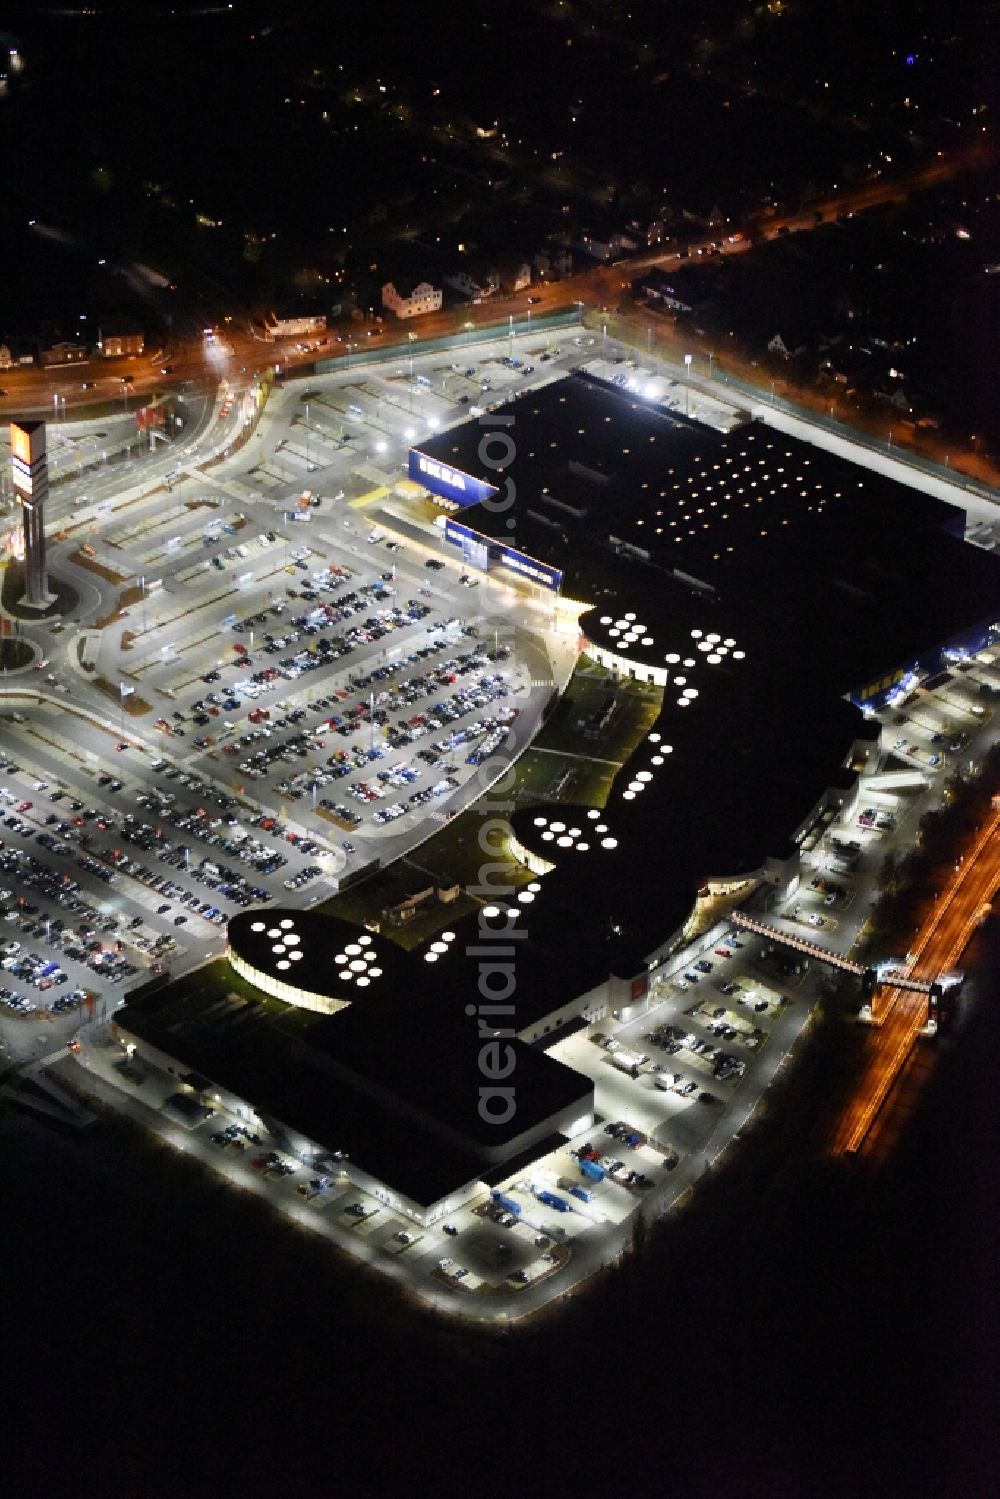 Aerial image at night Lübeck - Night view building the shopping mall LUV SHOPPING at IKEA furnishing house in Daenischburg, Luebeck in Schleswig-Holstein